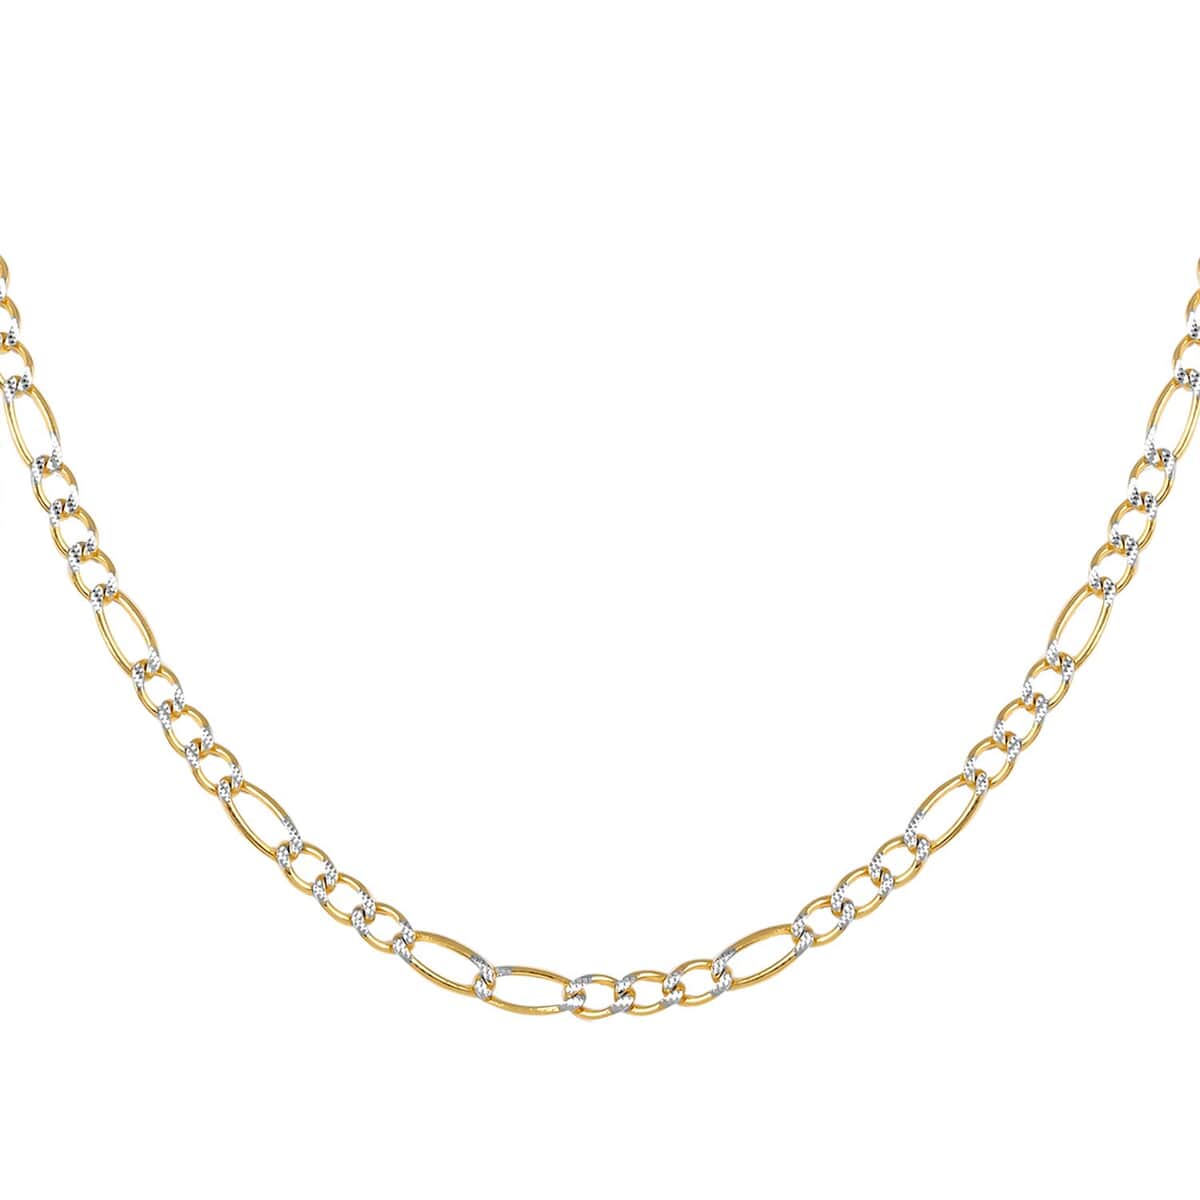 Maestro Gold Collection Italian 10K Yellow & White Gold Pave Figaro Necklace | Dual Tone Gold Figaro Chain Necklace | 18 Inches Chain Necklace | Gold Jewelry For Her 6.80 Grams image number 3